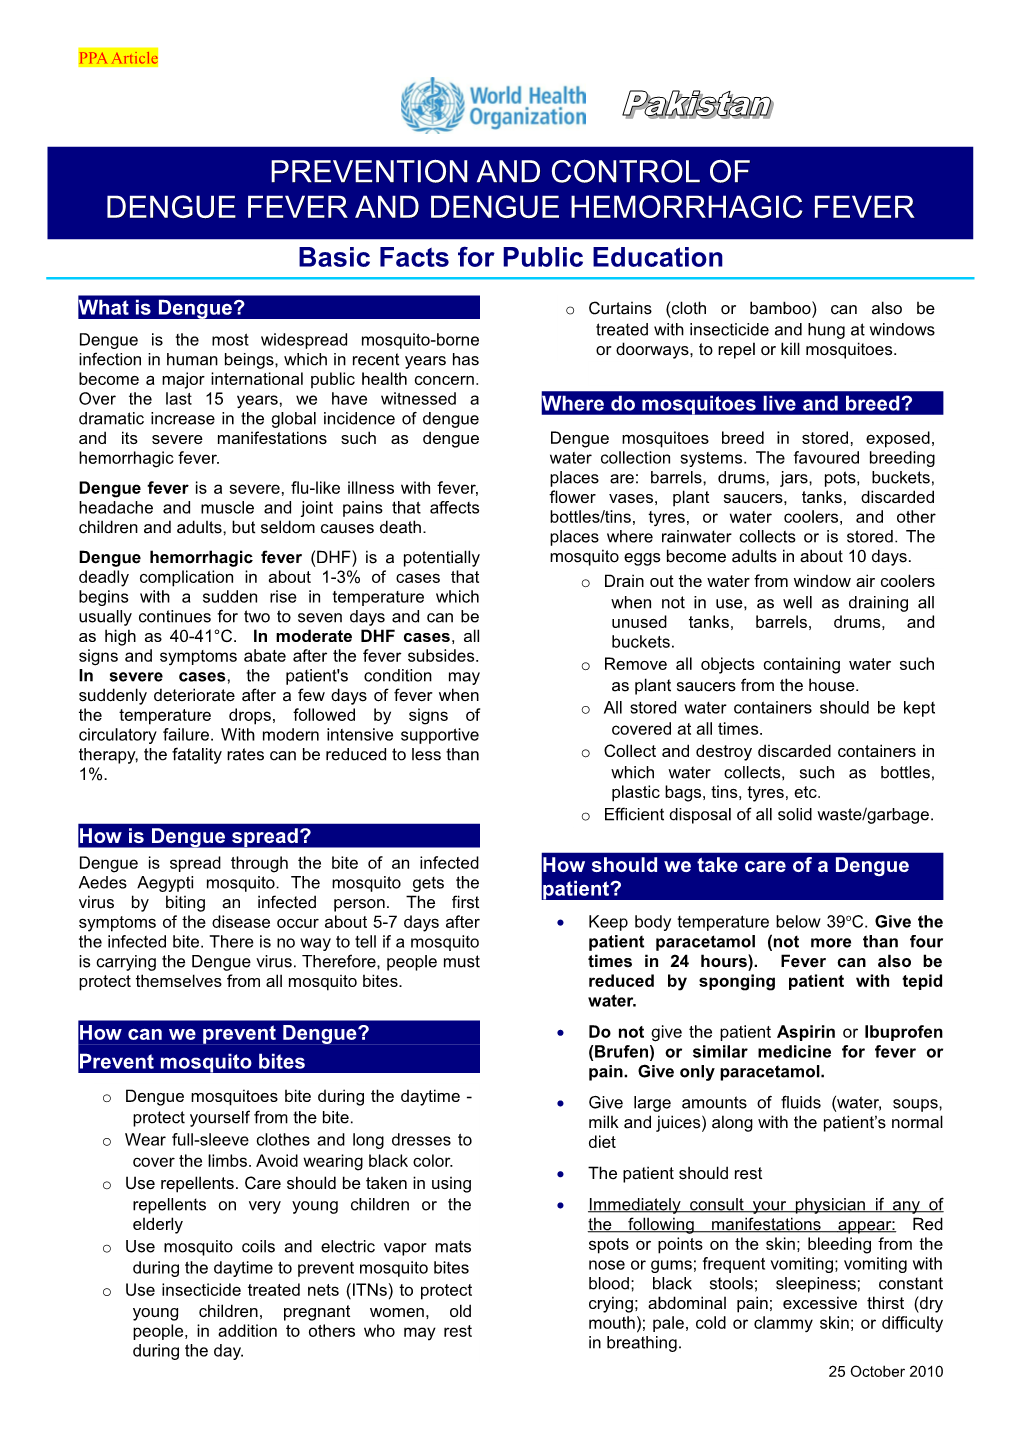 Basic Facts for Public Education